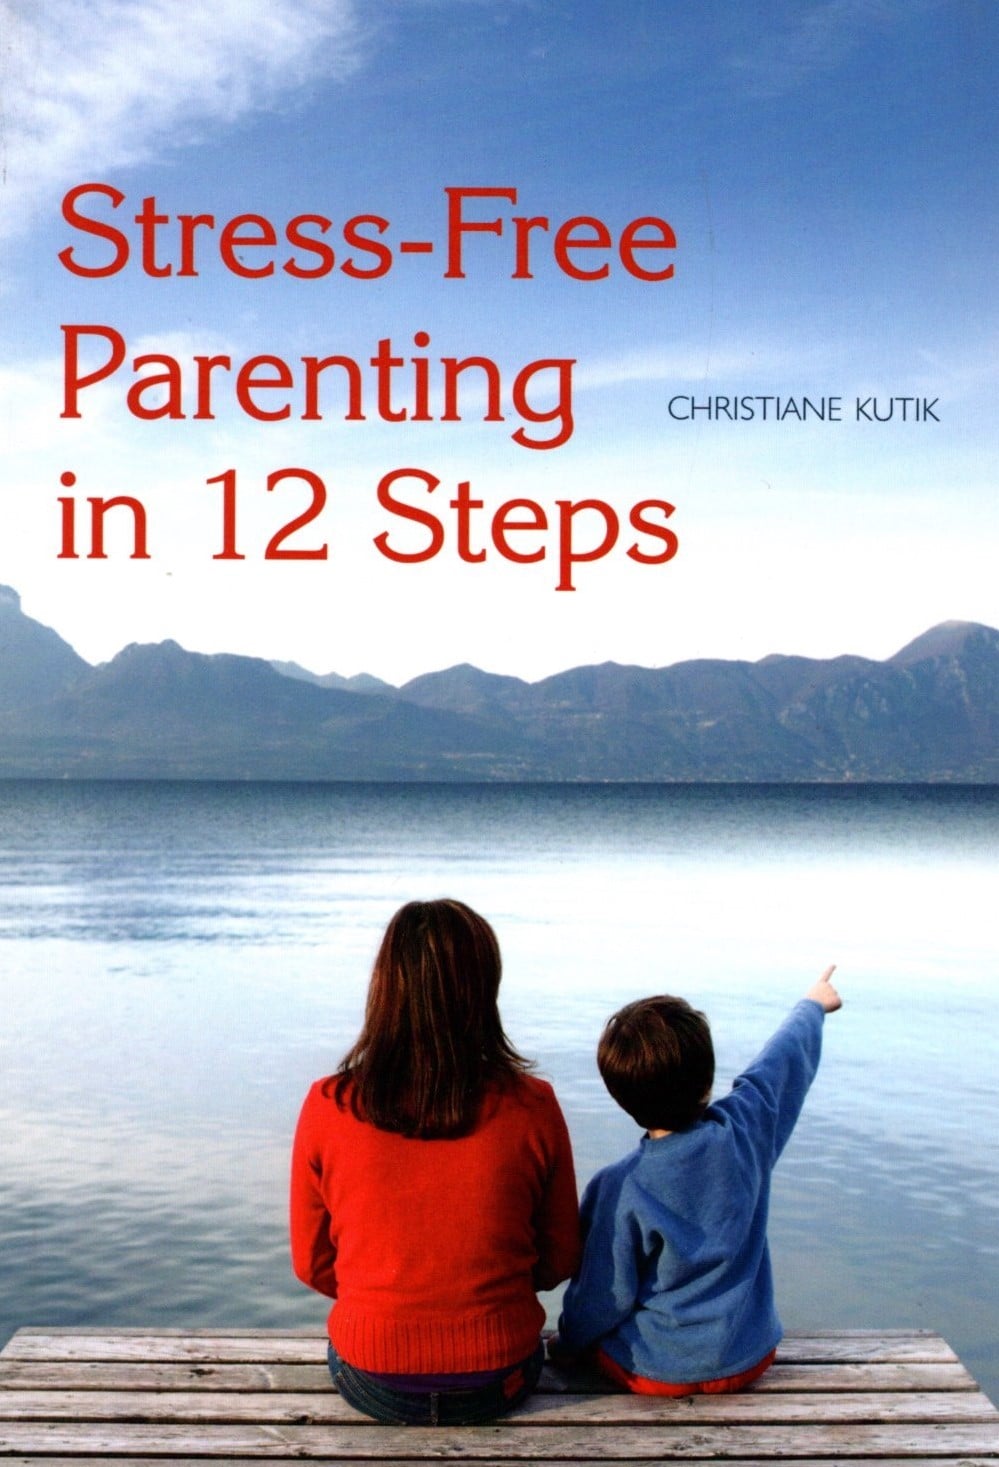 Stress-Free Parenting in 12 Steps